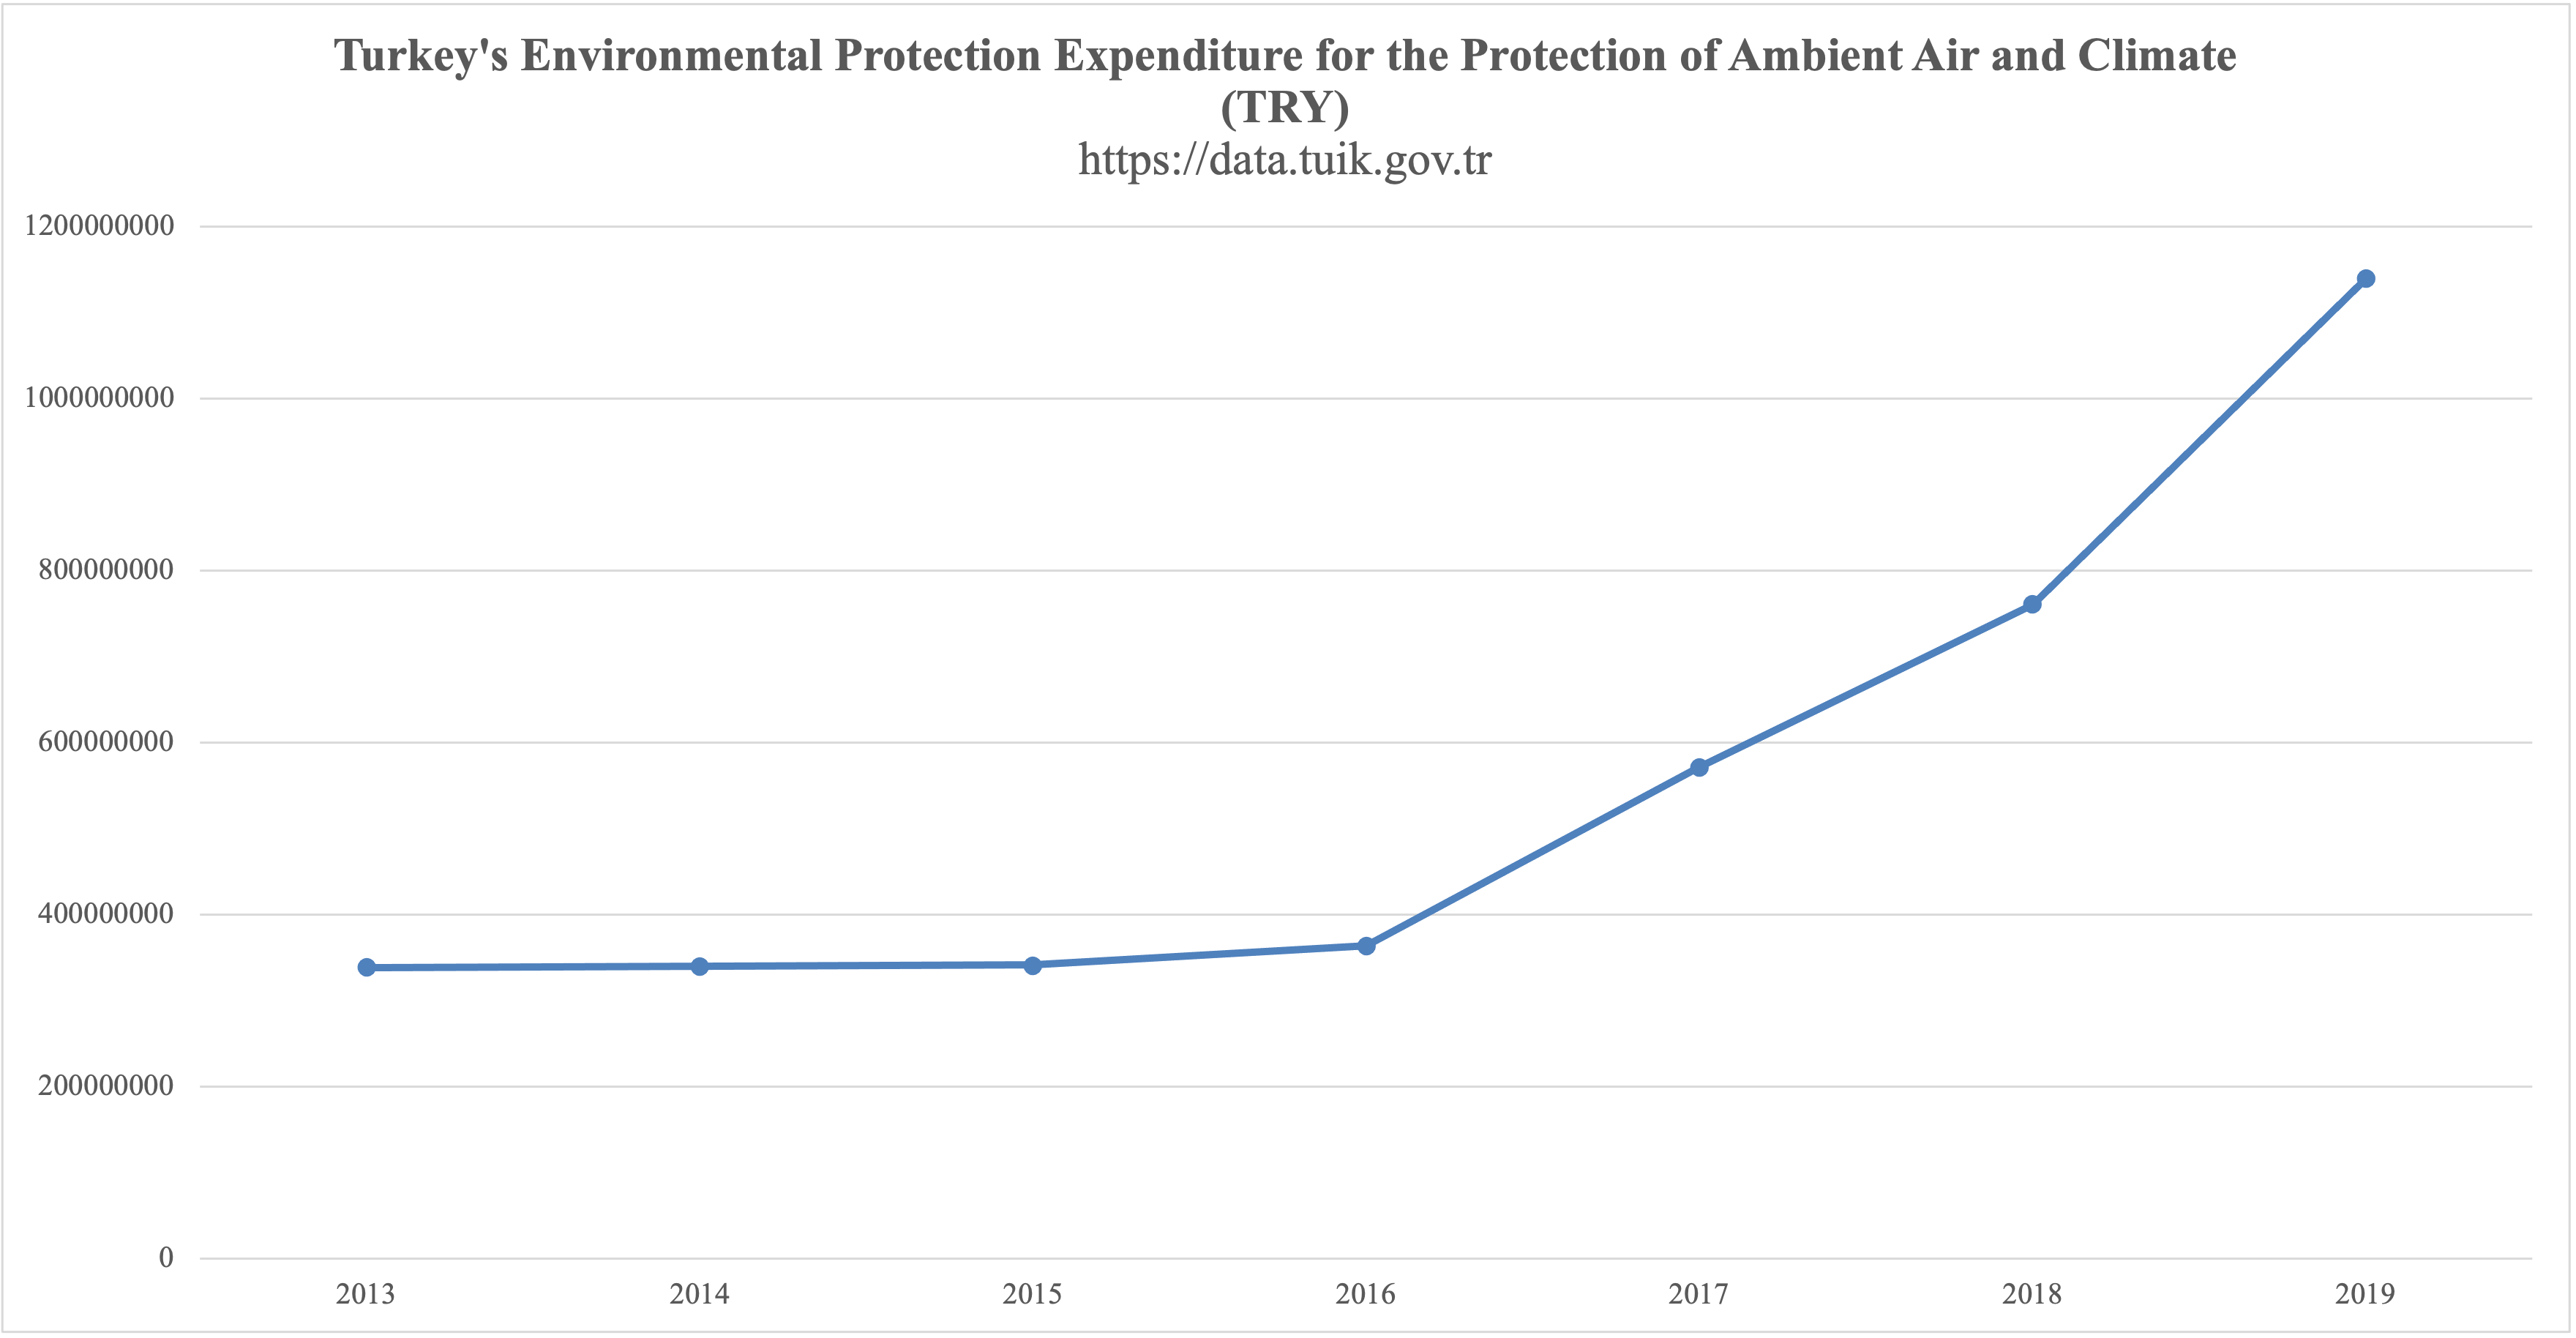 Figure 2. Turkey’s environmental protection expenditure for the protection of ambient air and climate (TRY) https://data.tuik.gov.tr